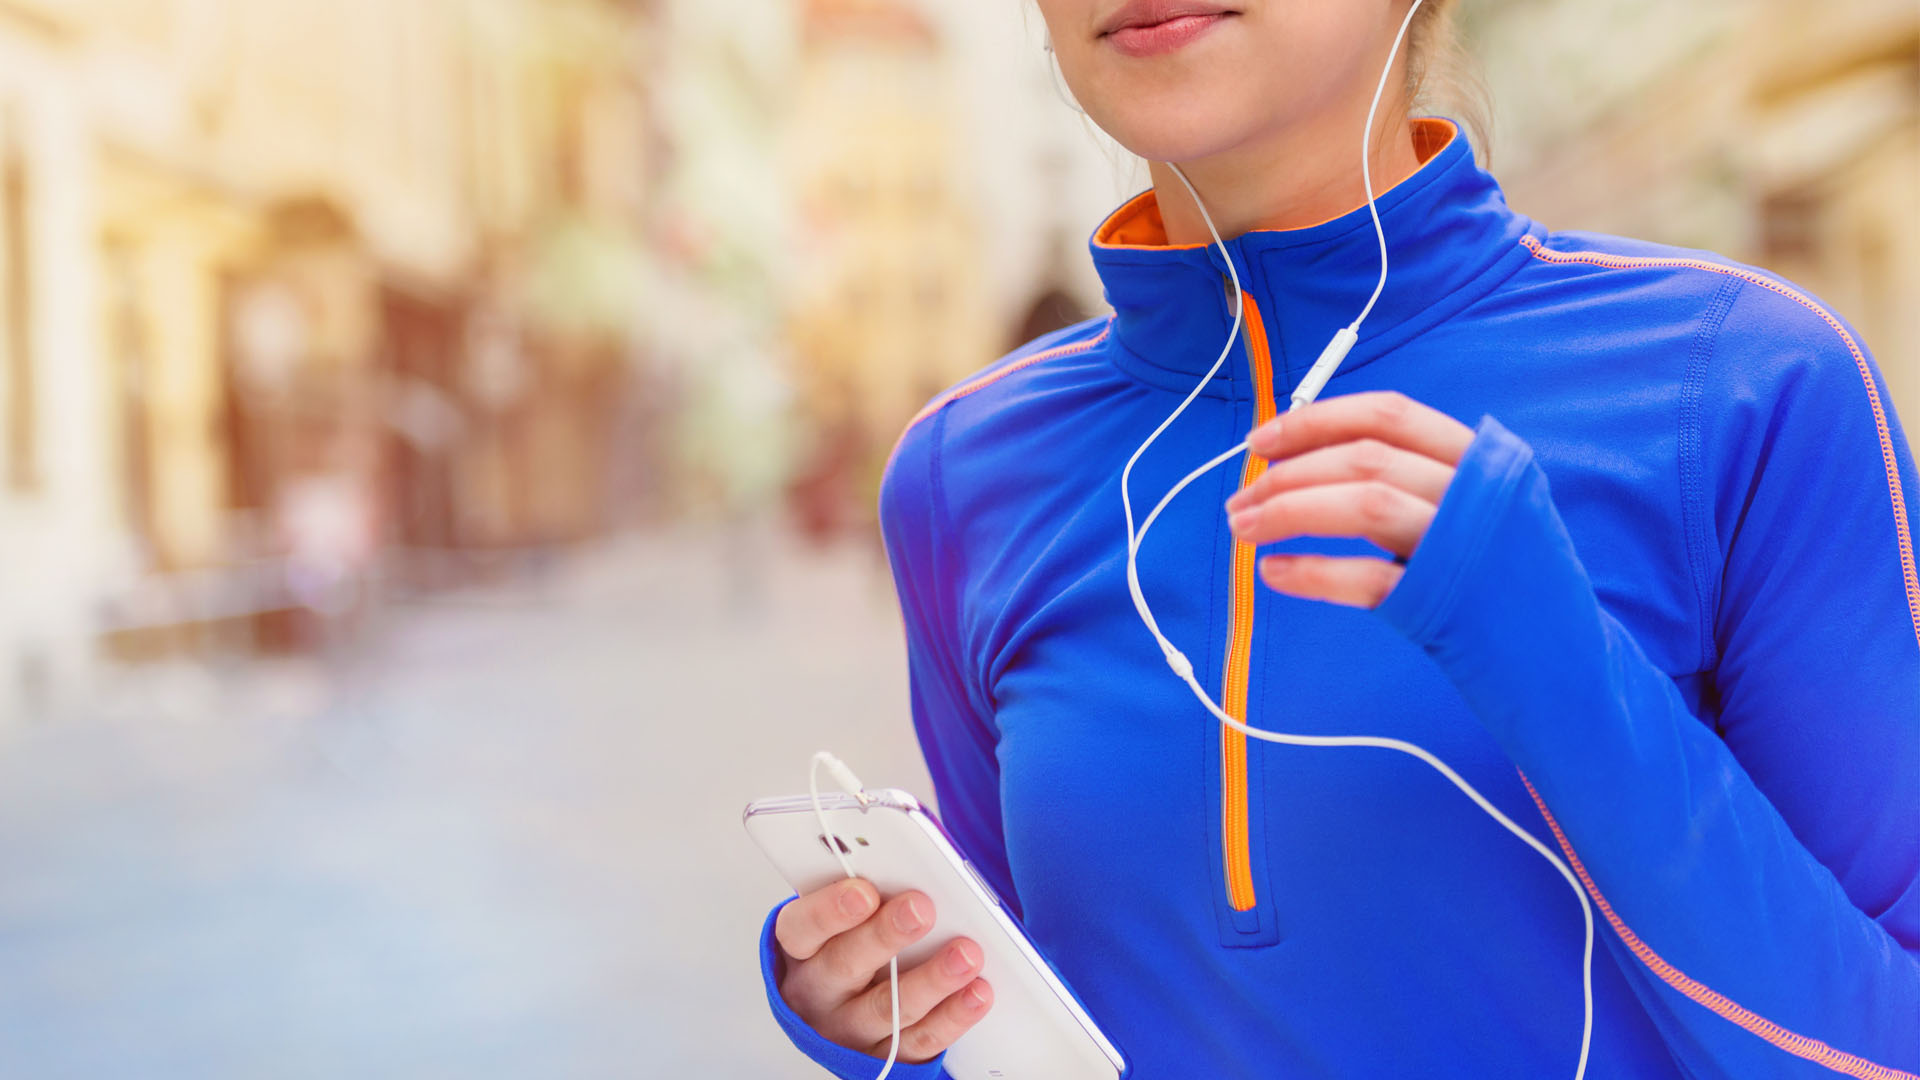 Woman jogging in city streets listening to music